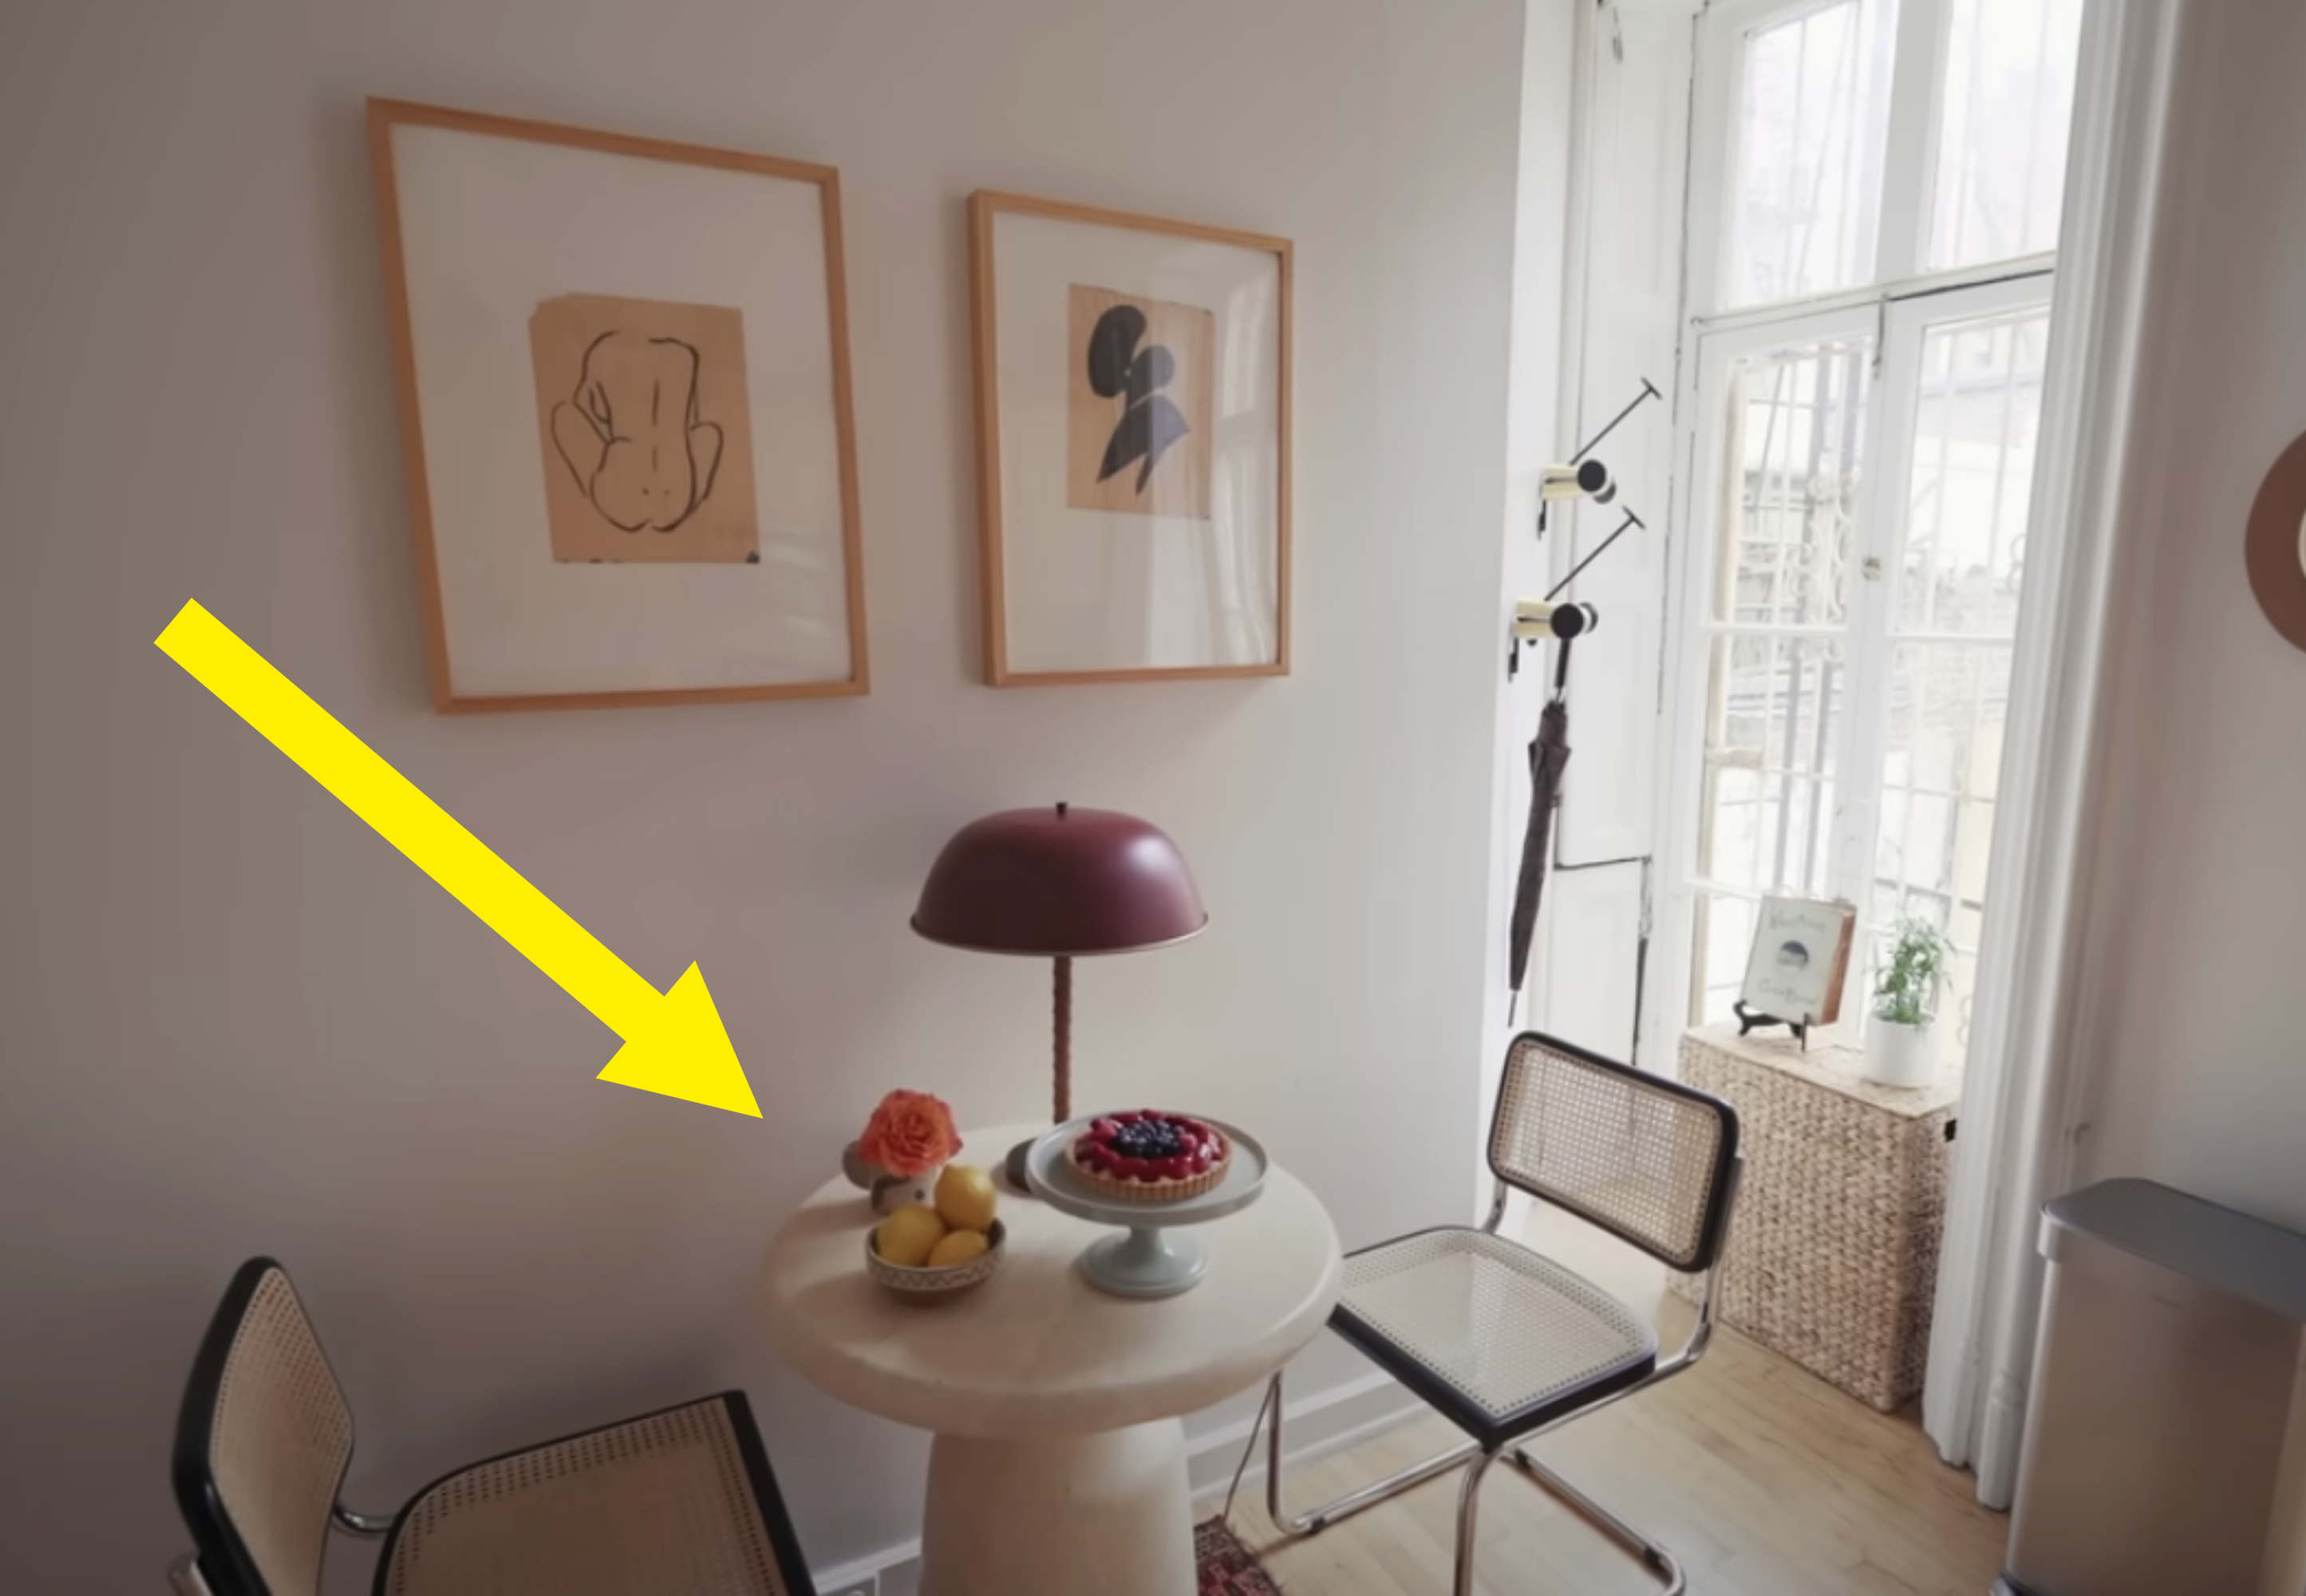 Arrow pointing to a bowl of lemons on a table in a well-designed rental kitchen